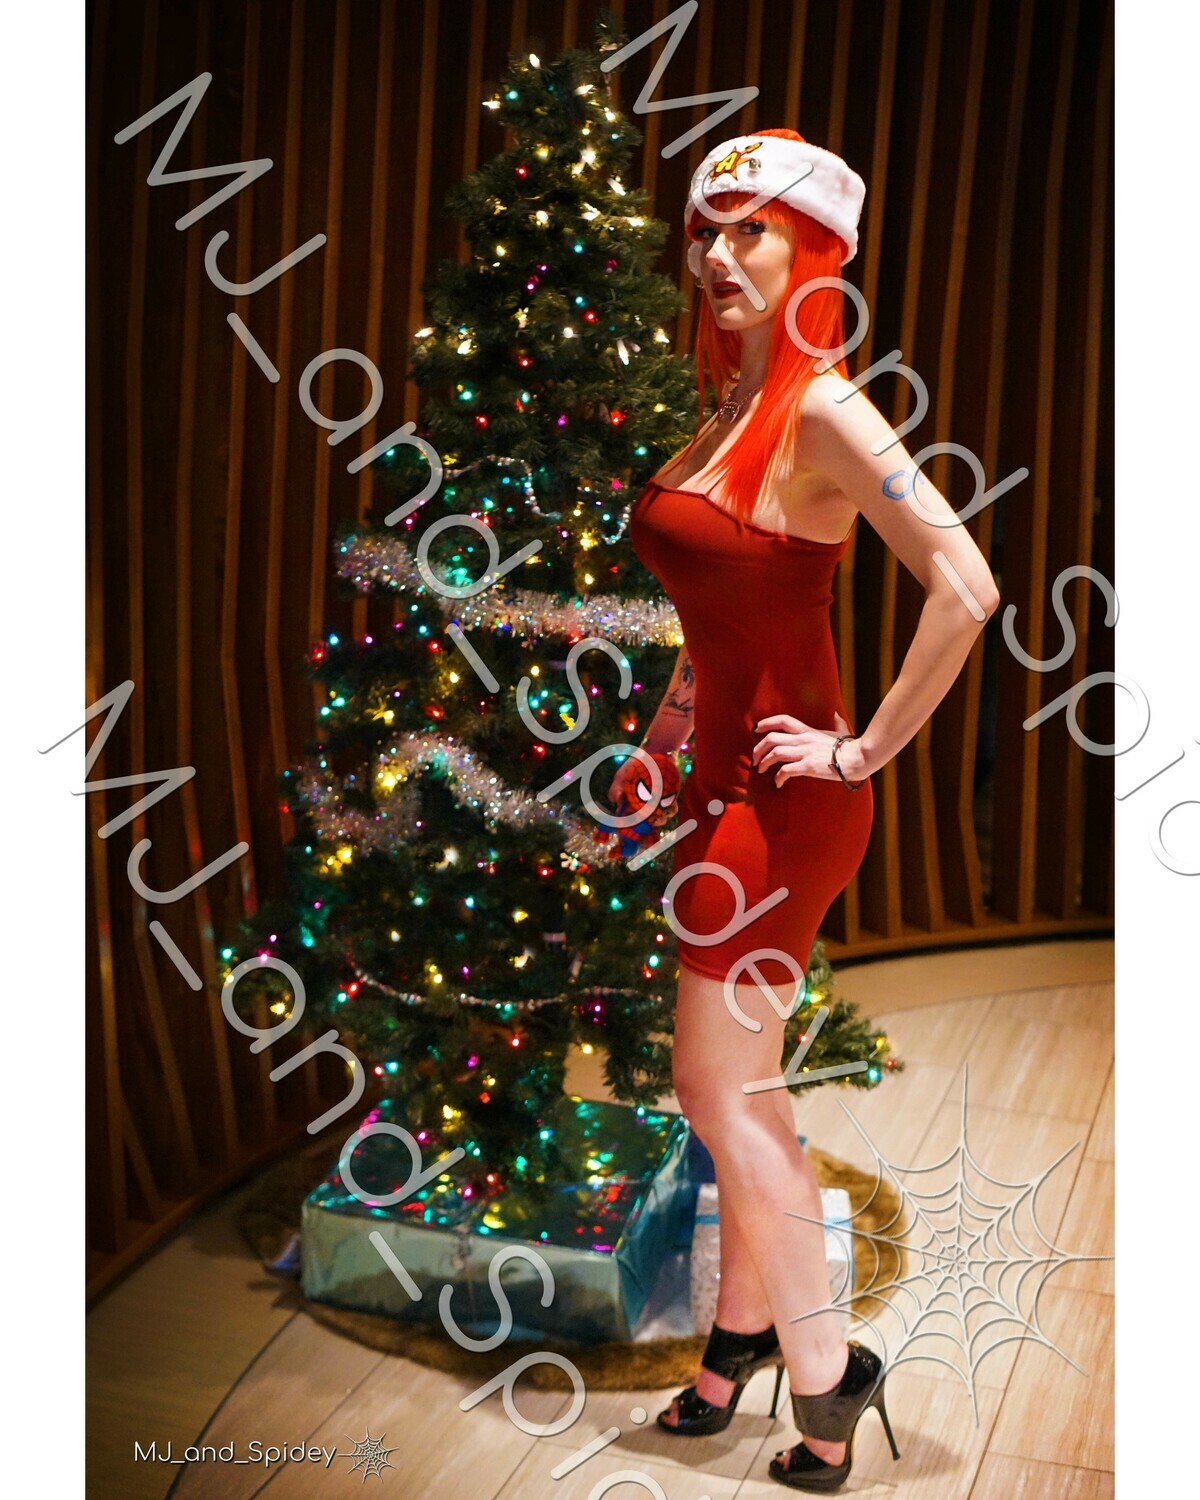 Marvel - Spider-Man - Mary Jane Watson - Christmas 1 -  Cosplay Print (@MJ_and_Spidey, MJ and Spidey, Comics)